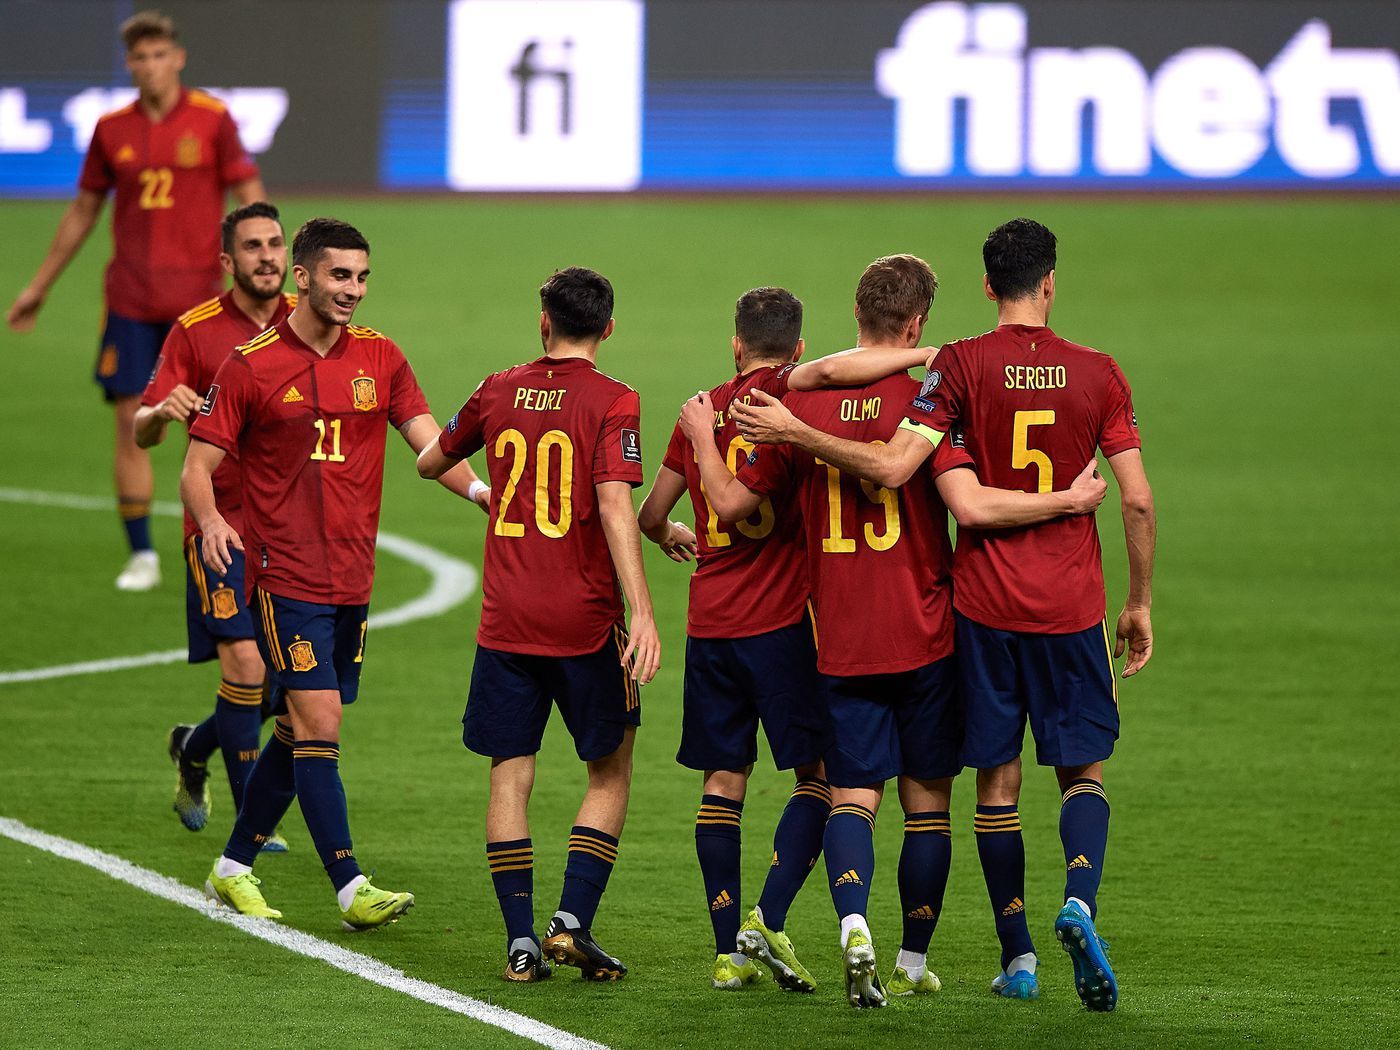 Euro 2021 Group E odds, schedule preview: Spain a heavy favorite with Poland, Sweden battling for second